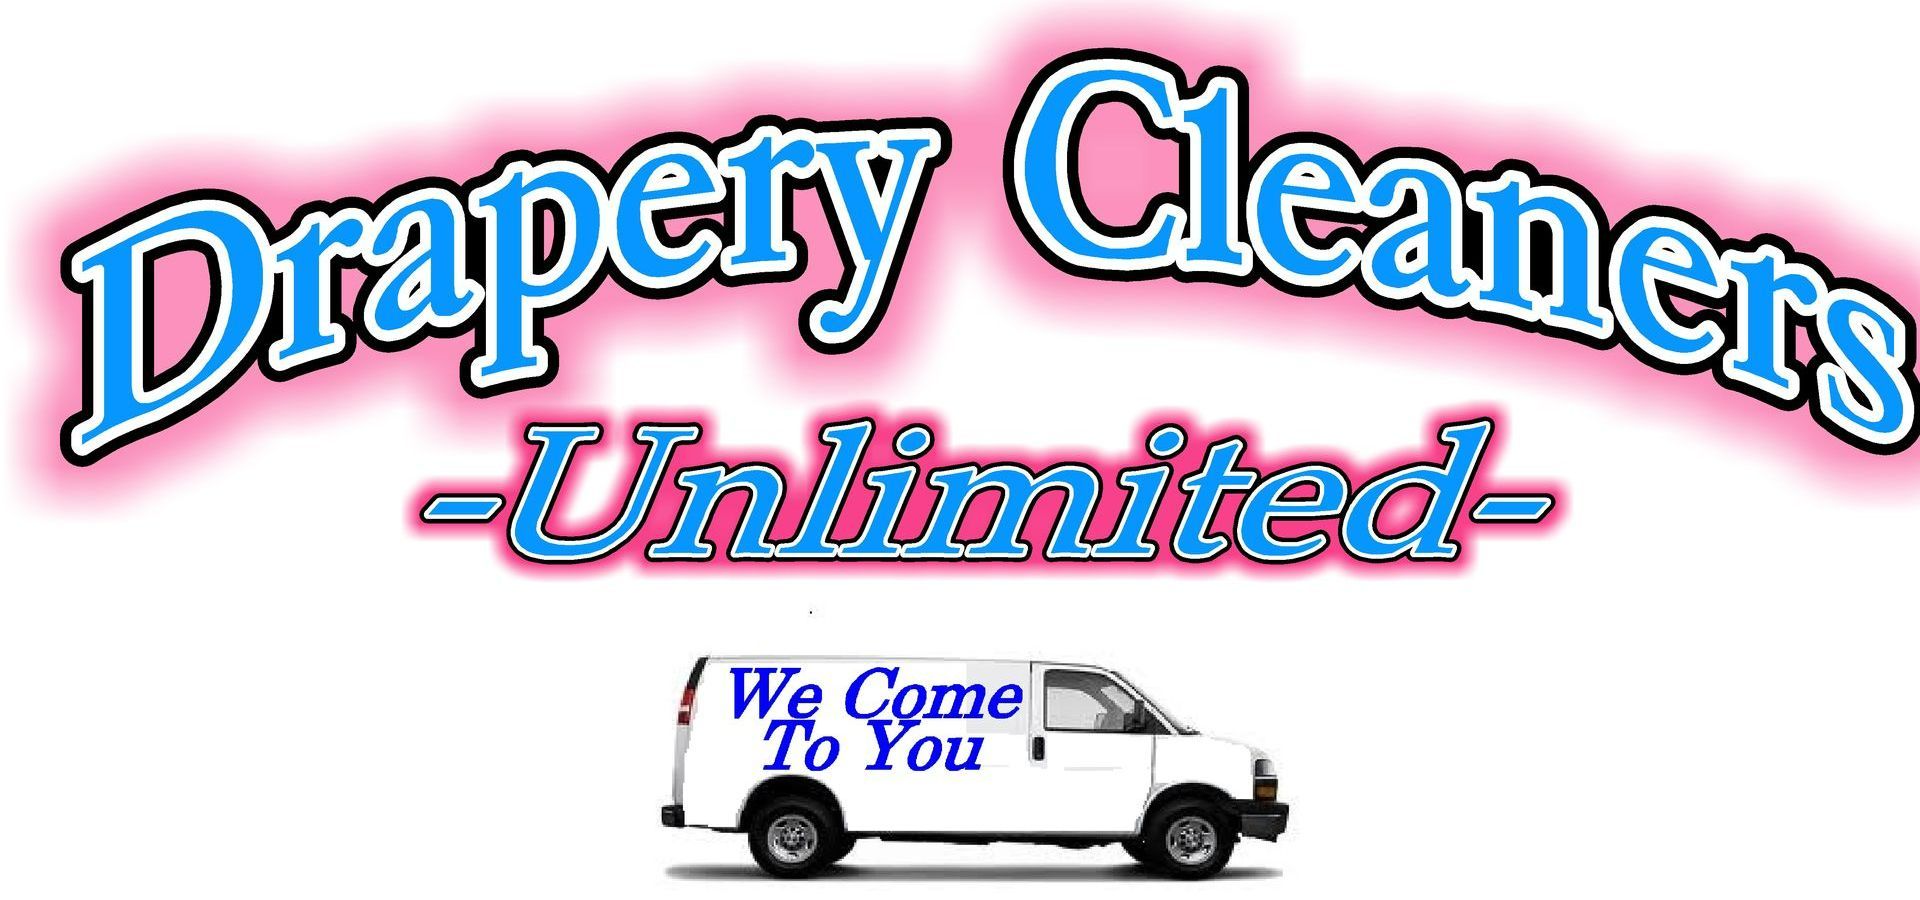 Drapery Cleaners and dry cleaners logo